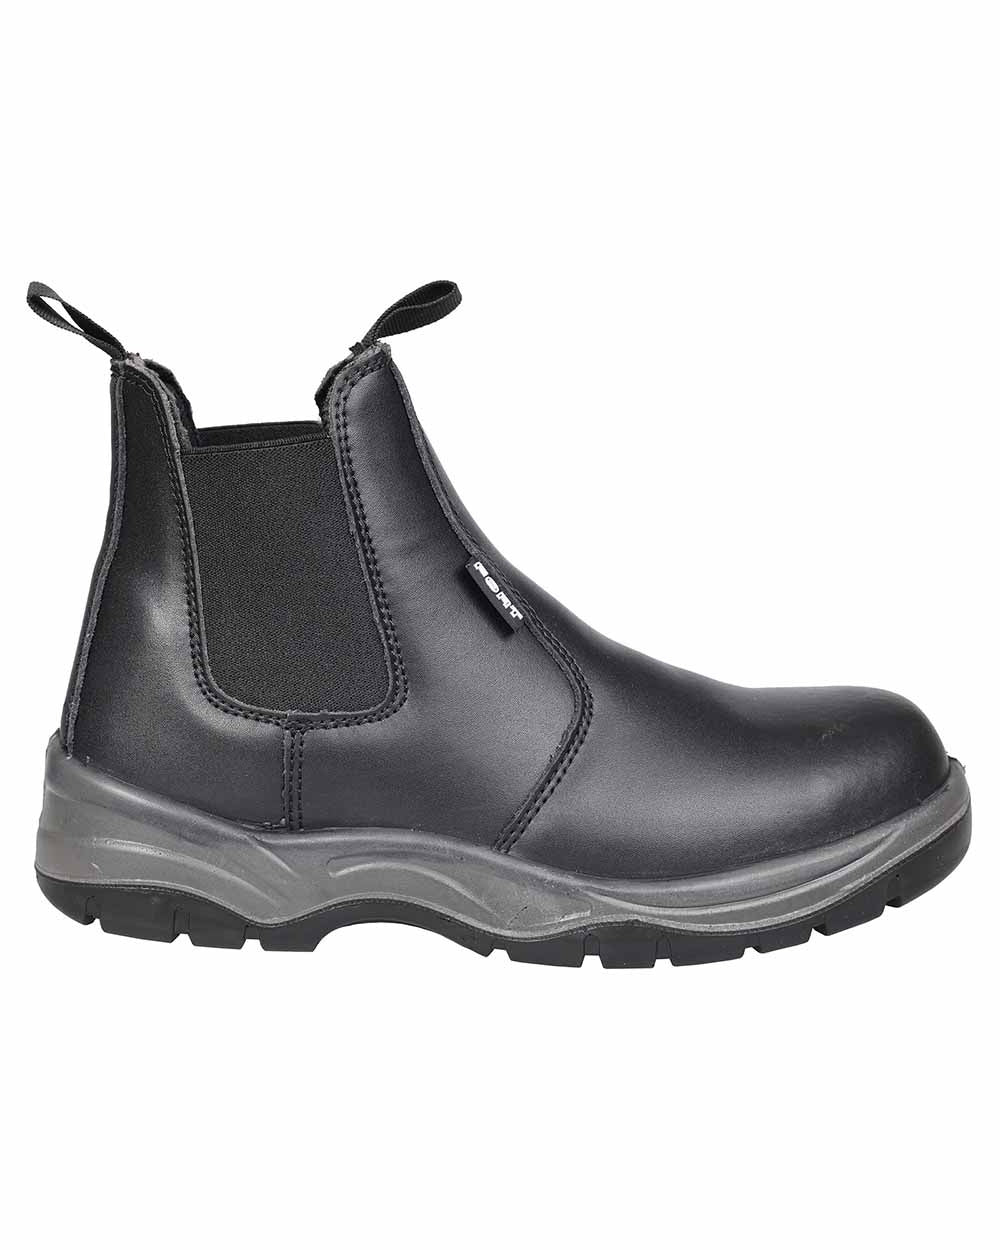 Black Coloured Fort Nelson Safety Dealer Boots On A White Background 